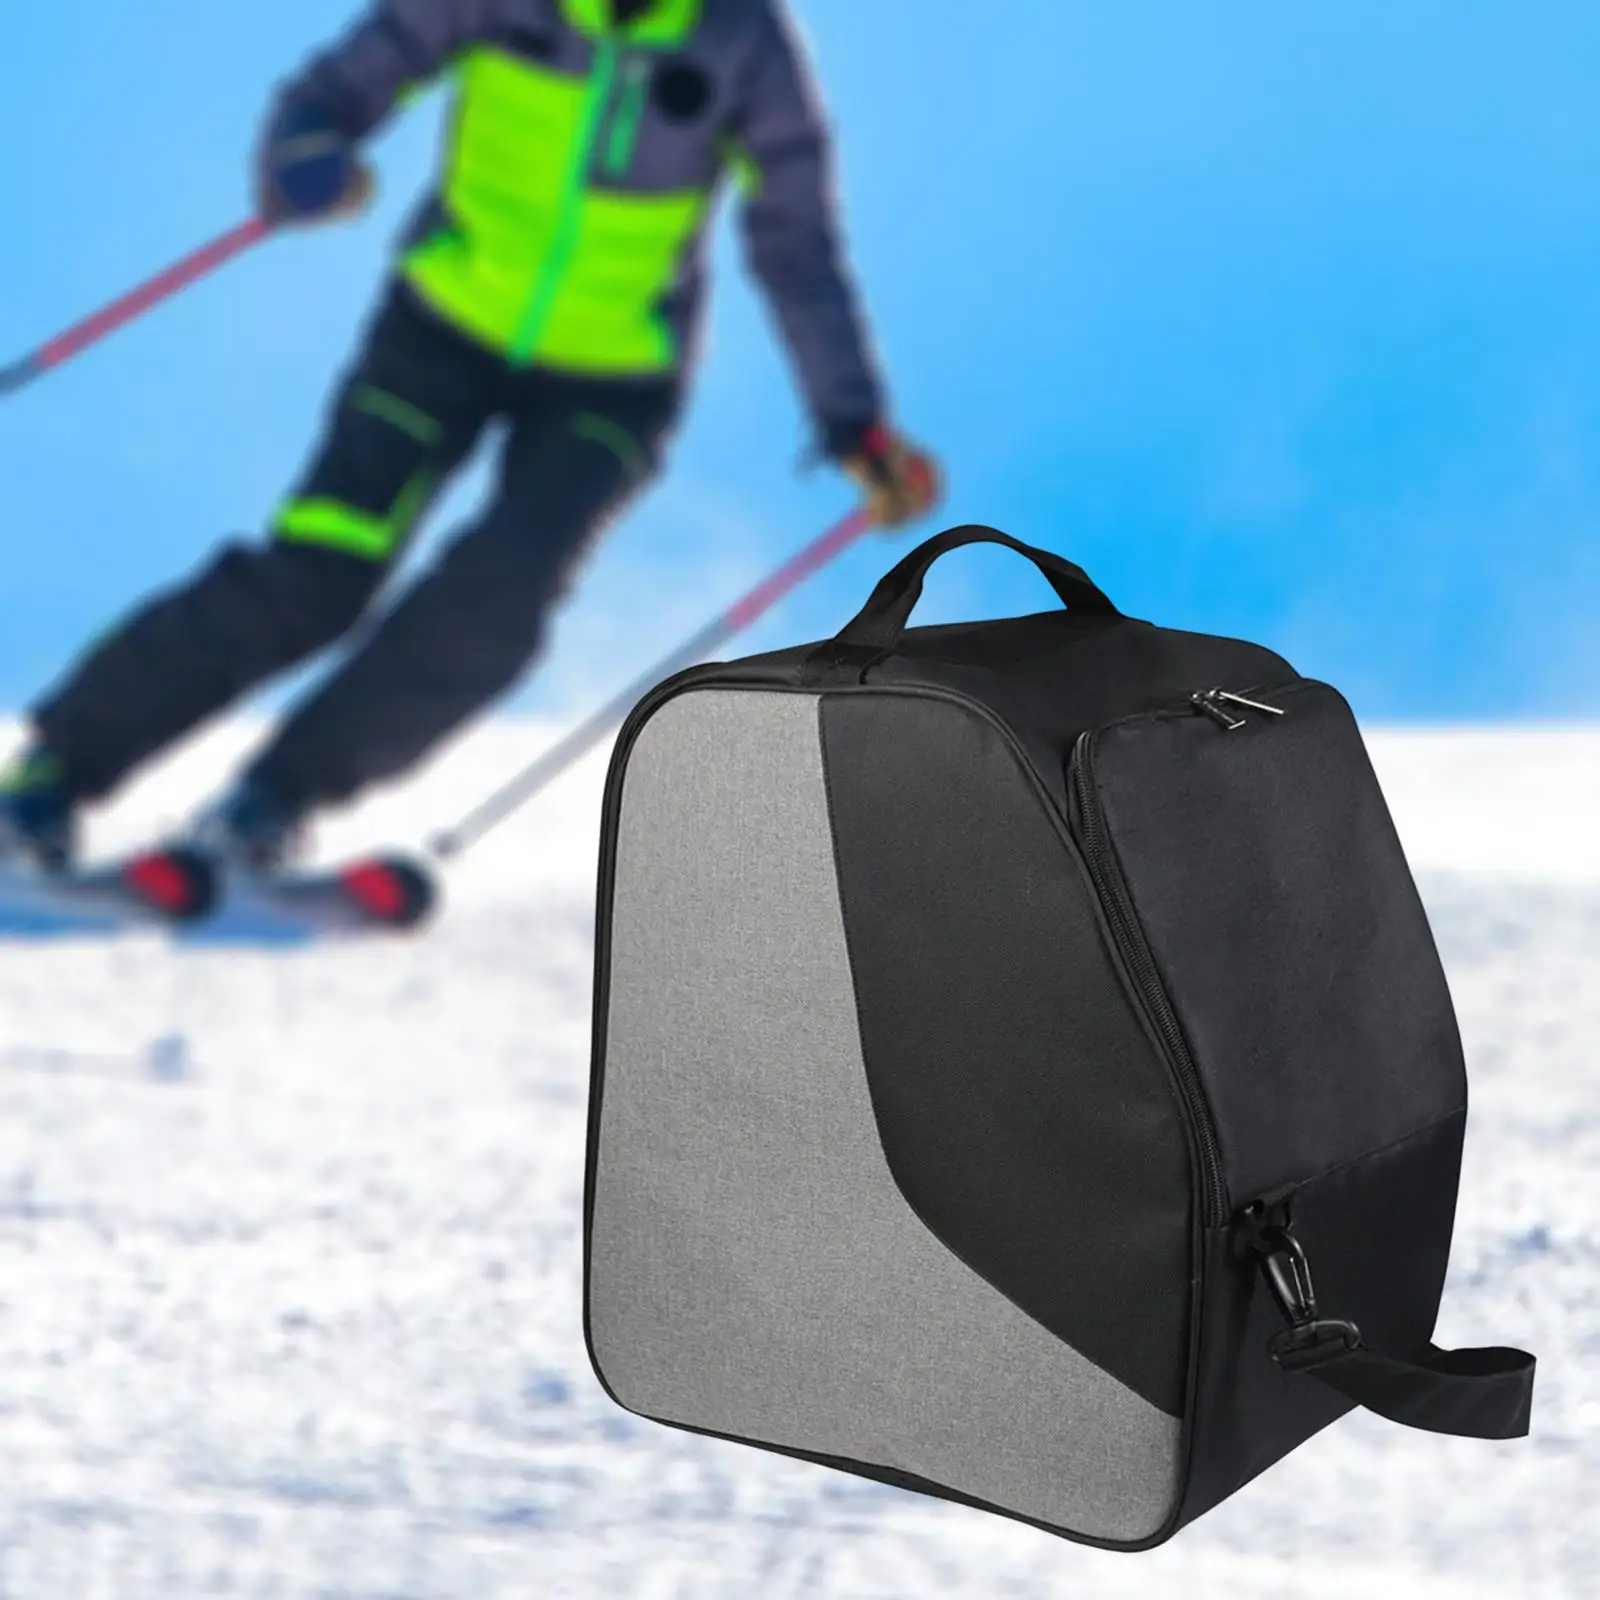 Portable Ski Boot Bag Large Capacity Carrying Bag Lightweight Cloth Compartments Backpack for Snowboard Women Skis Men Travel